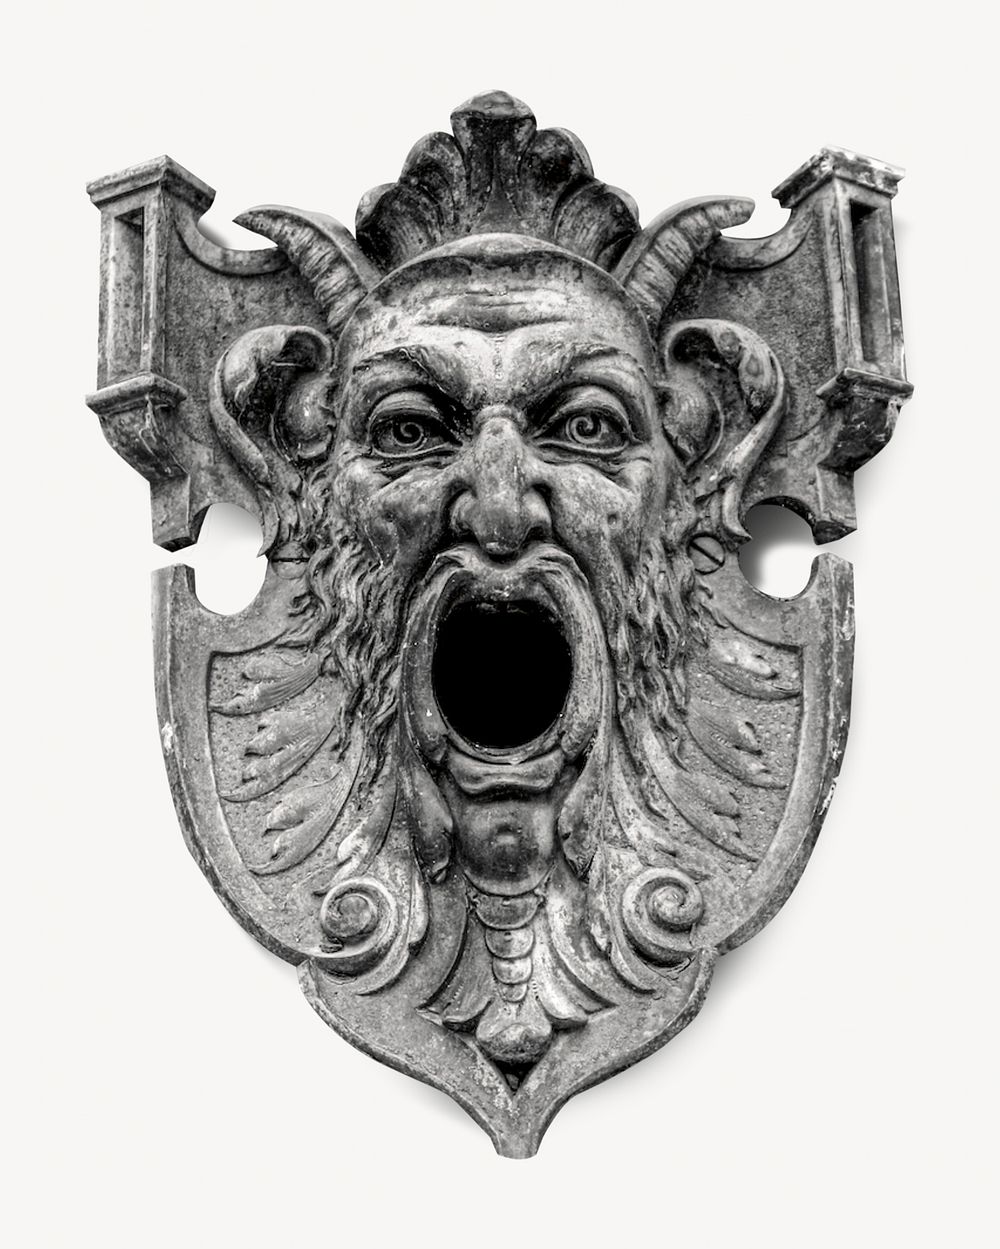 Devil face sculpture, isolated image